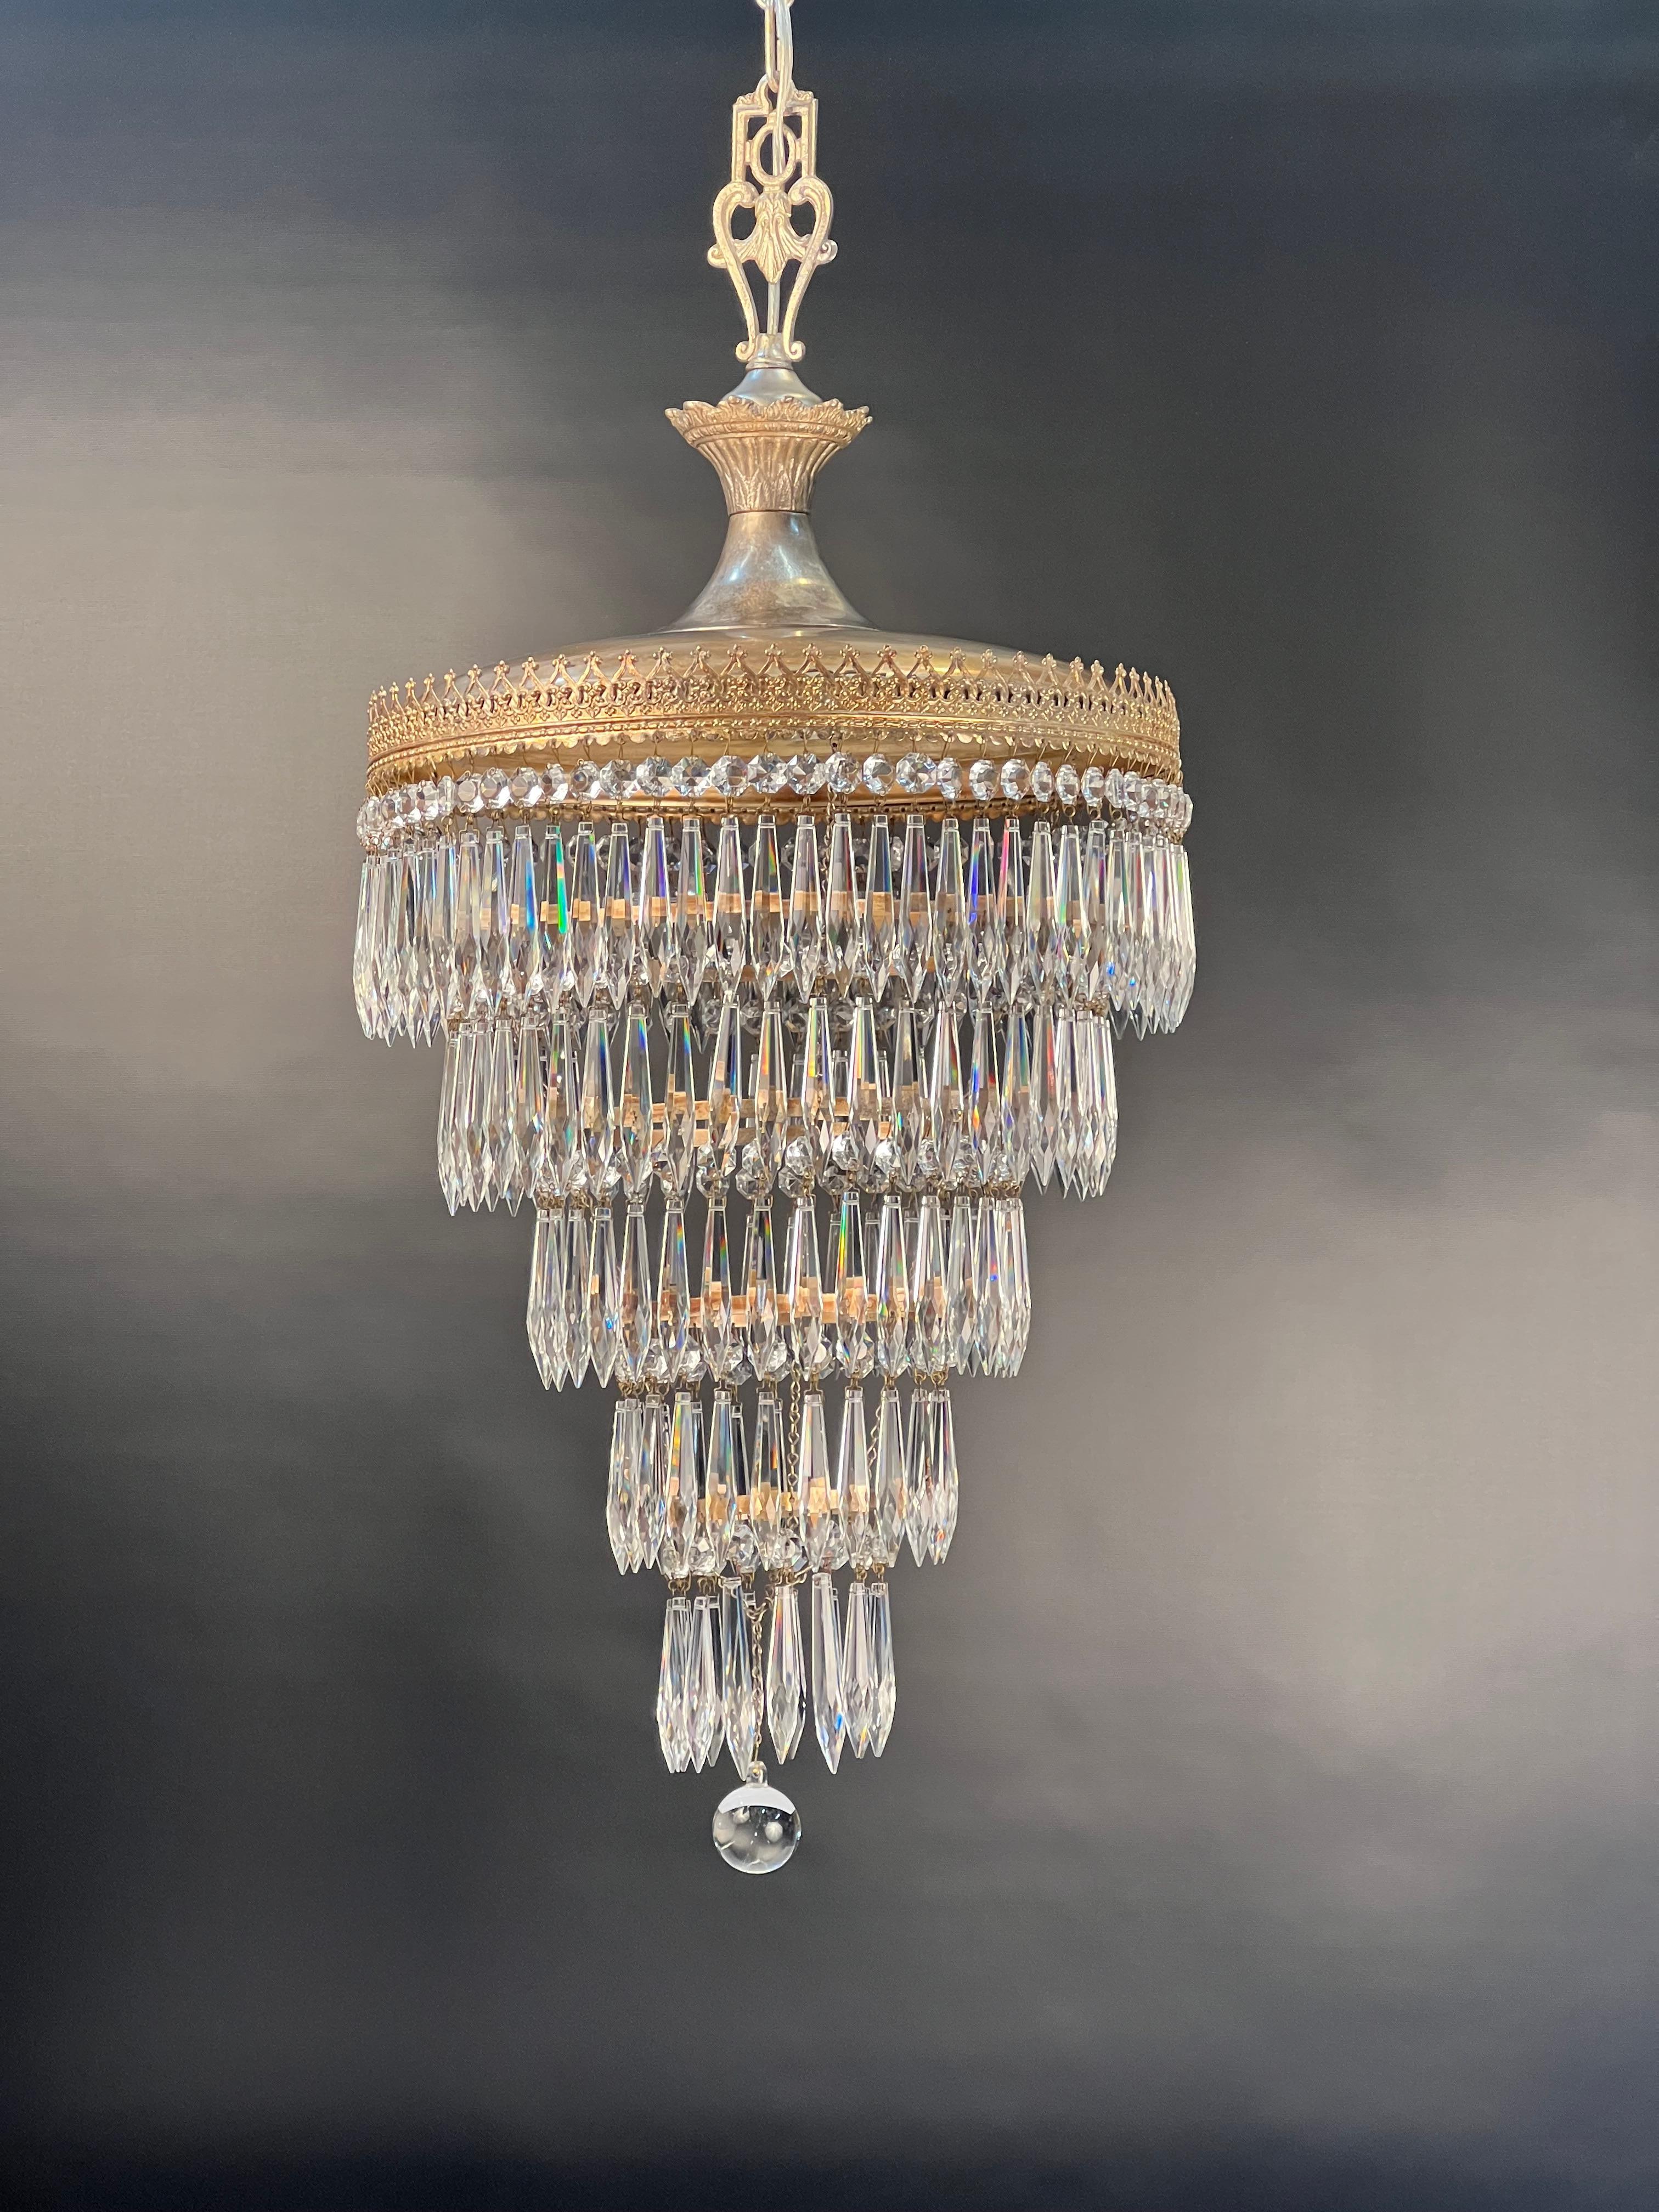 1920's silvered brass five tier wedding cake chandelier suspended from a silvered cast brass decorative loop.
